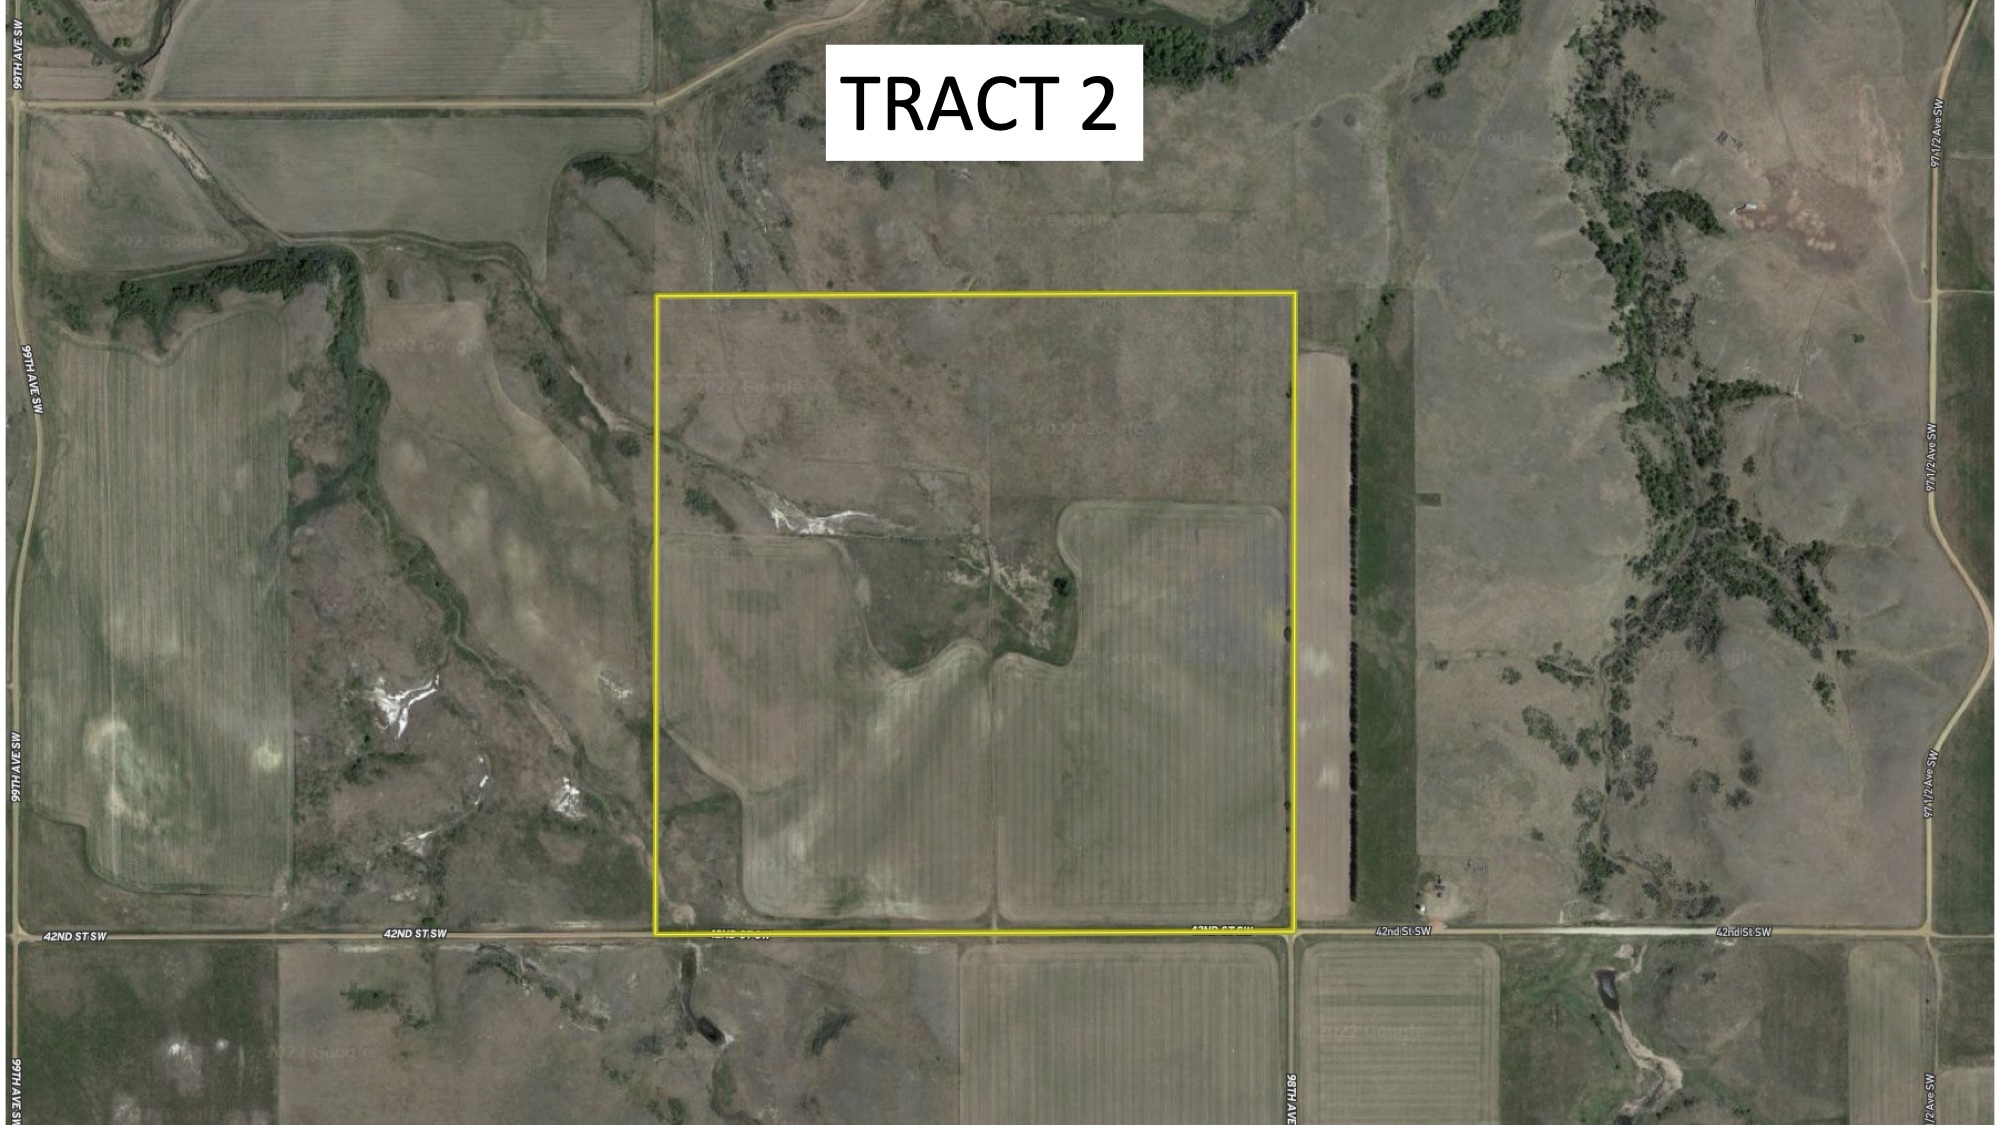 TRACT 2 AERIAL